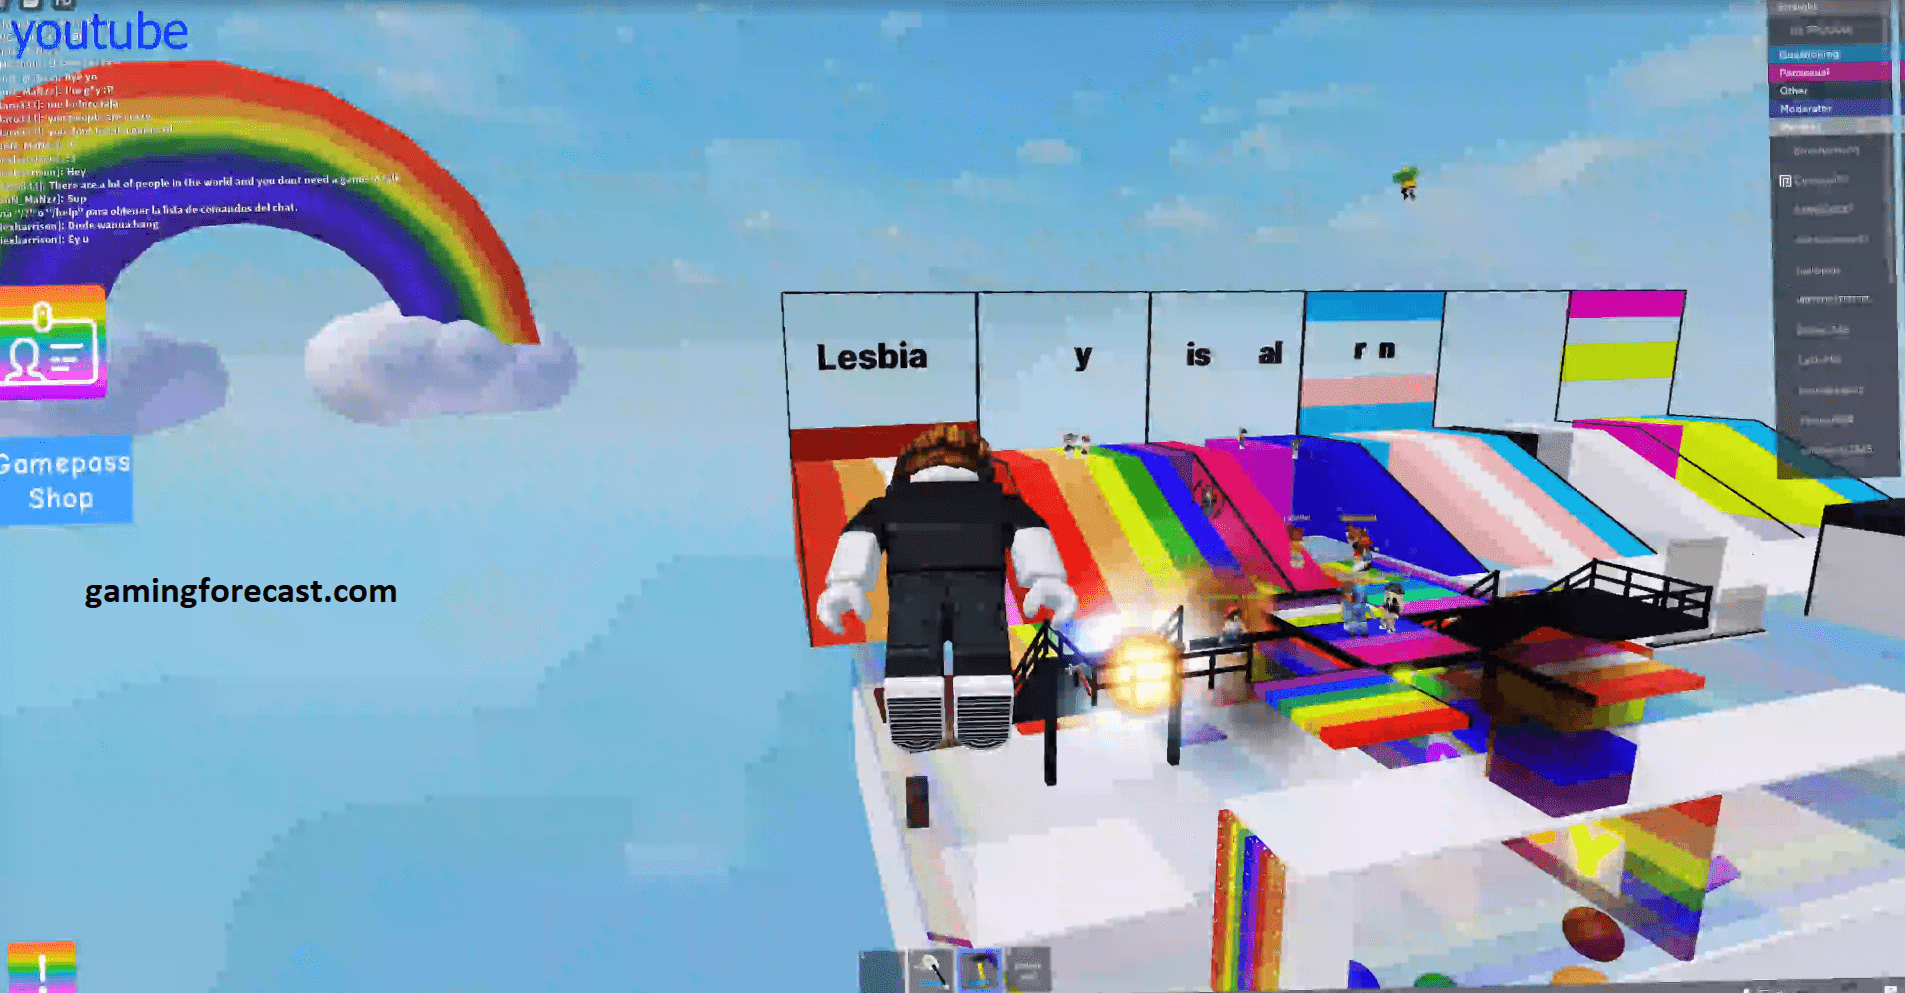 Roblox Hack Download Pc Destroy Lobby Fly Aimbot Scripts 2021 Gaming Forecast Download Free Online Game Hacks - baixar hack para roblox